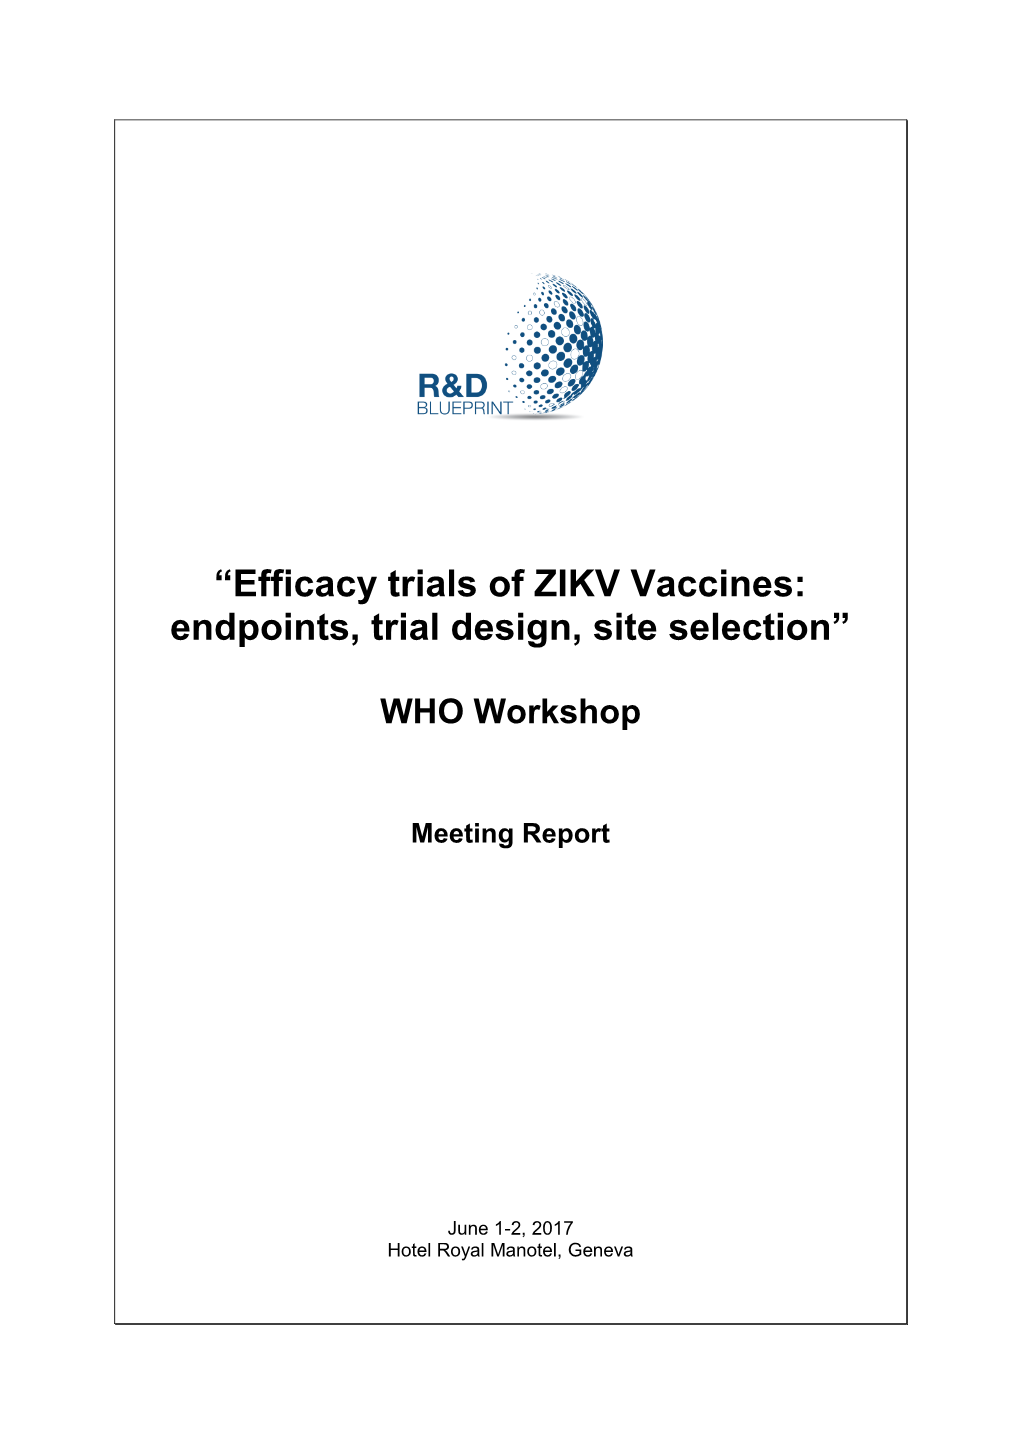 “Efficacy Trials of ZIKV Vaccines: Endpoints, Trial Design, Site Selection”